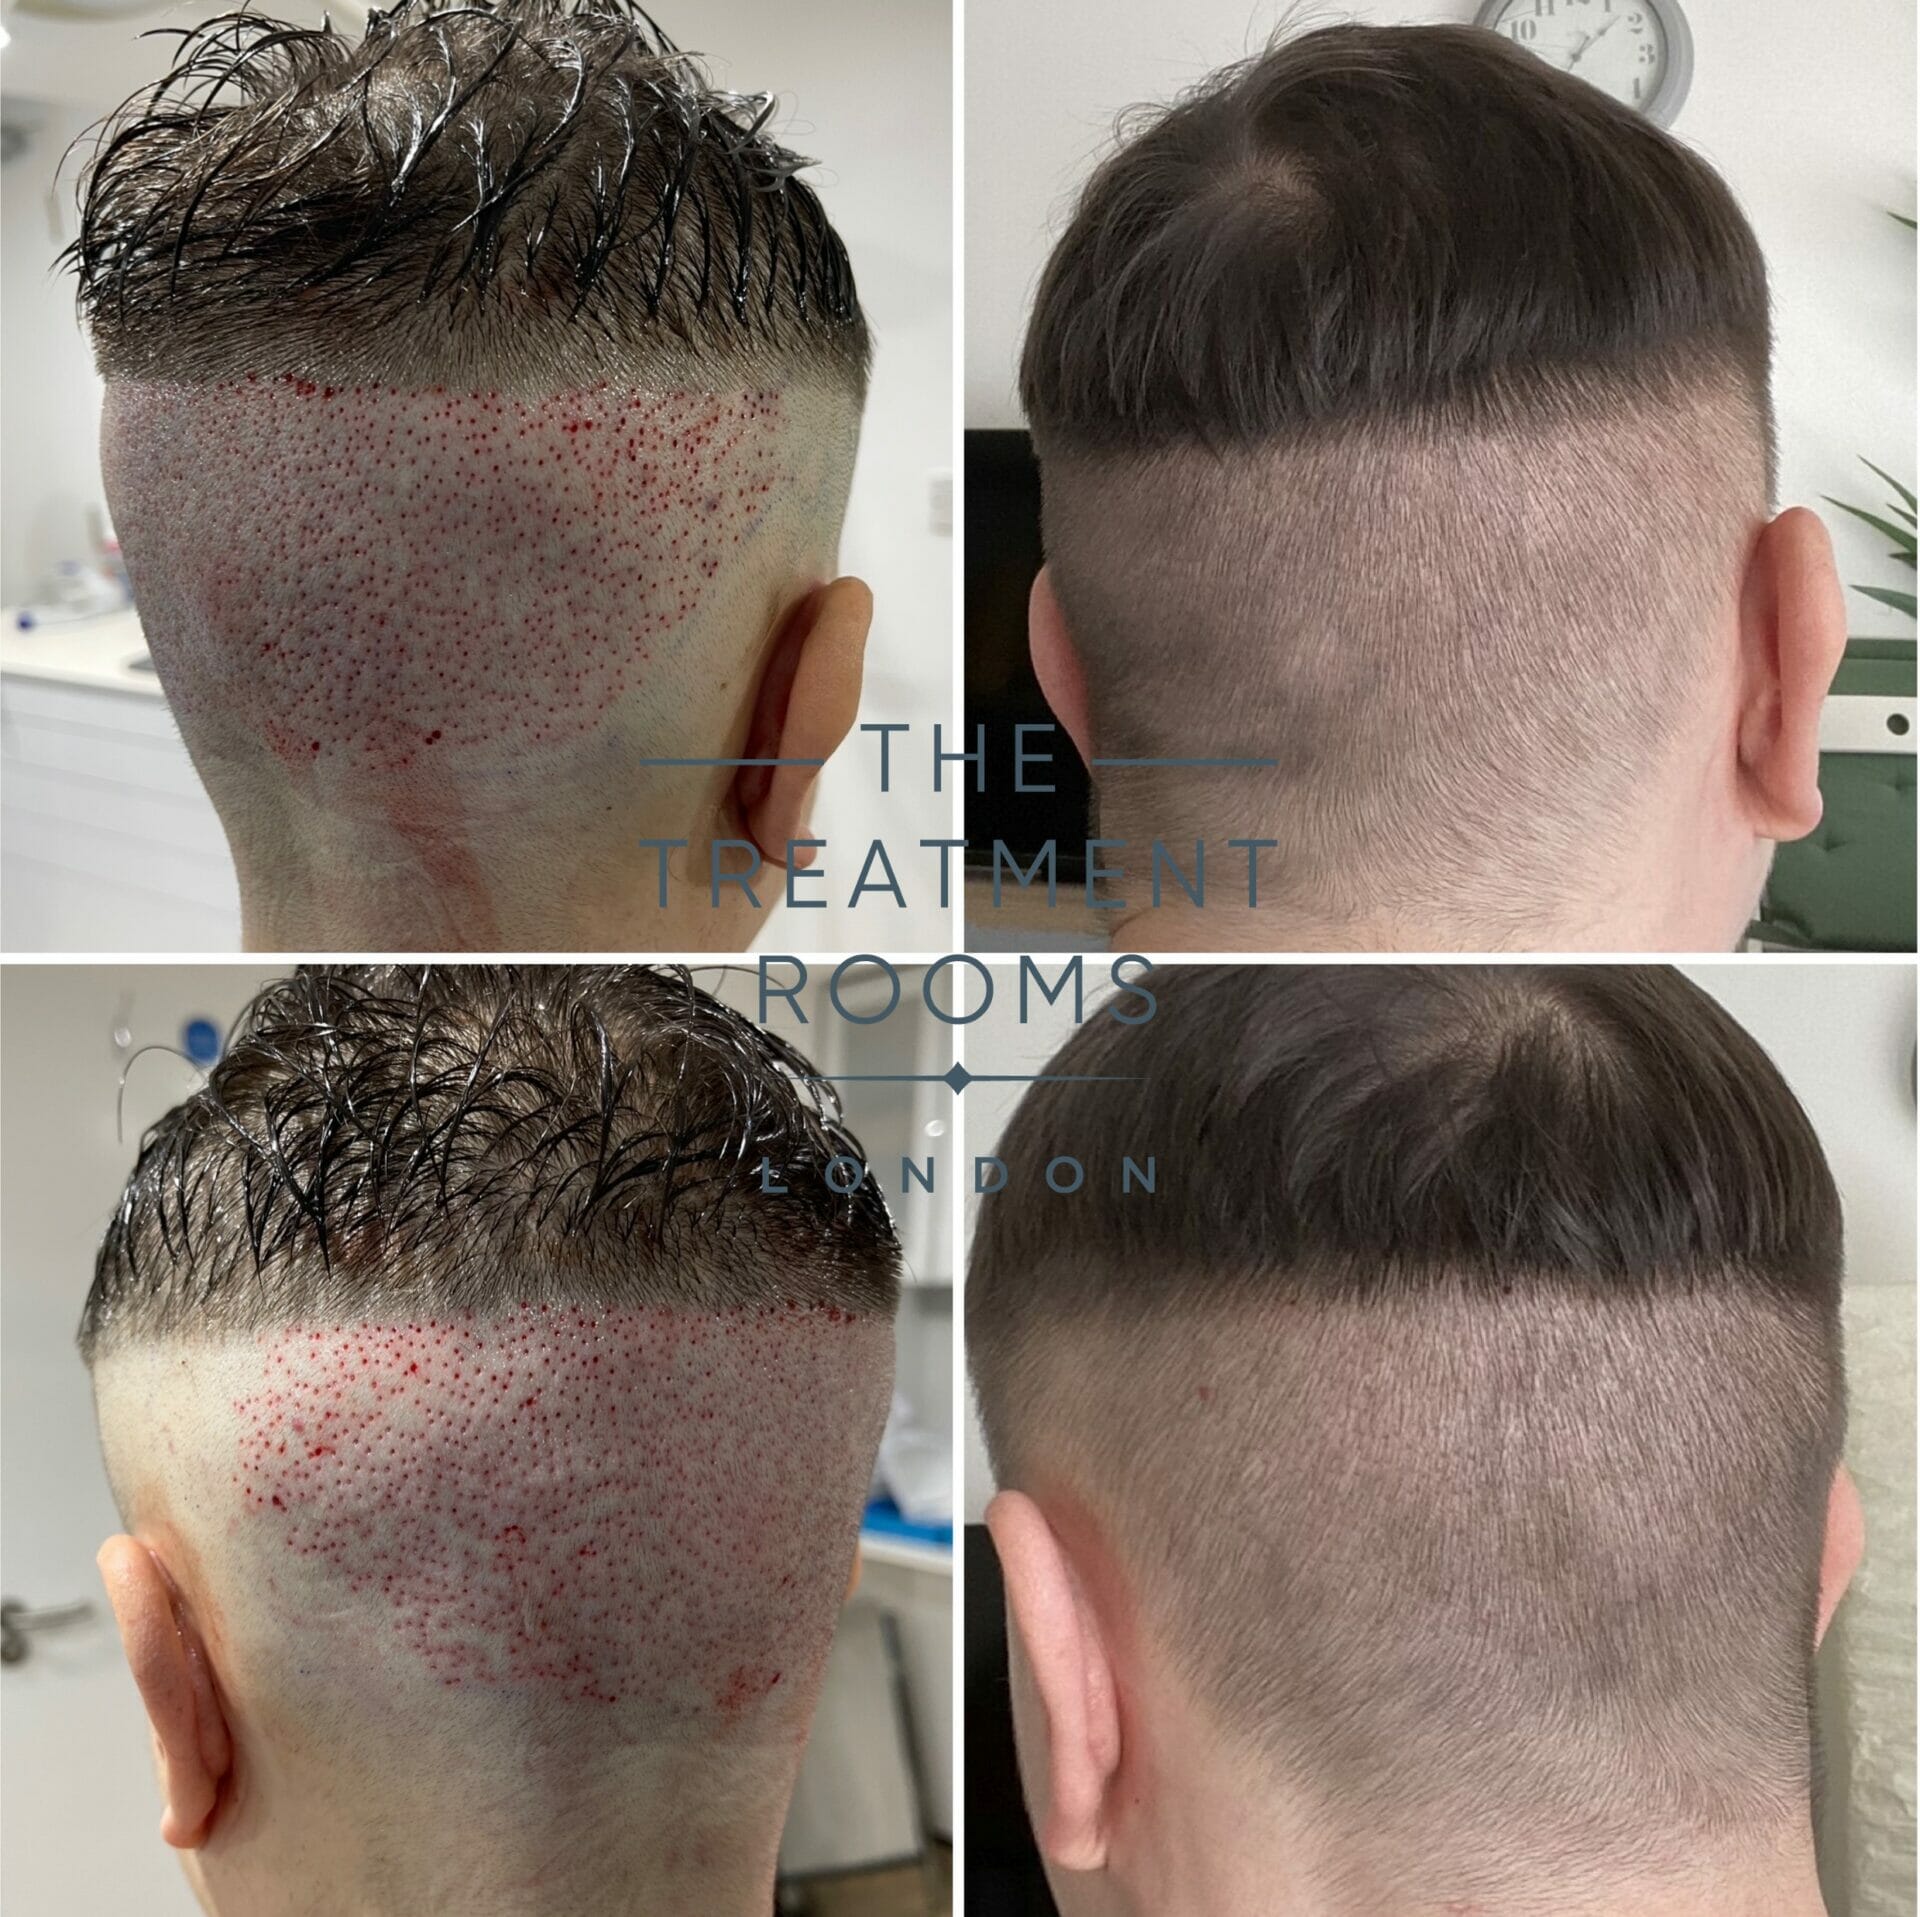 Unshaven FUE Hair Transplant UFUE The Treatment Rooms London